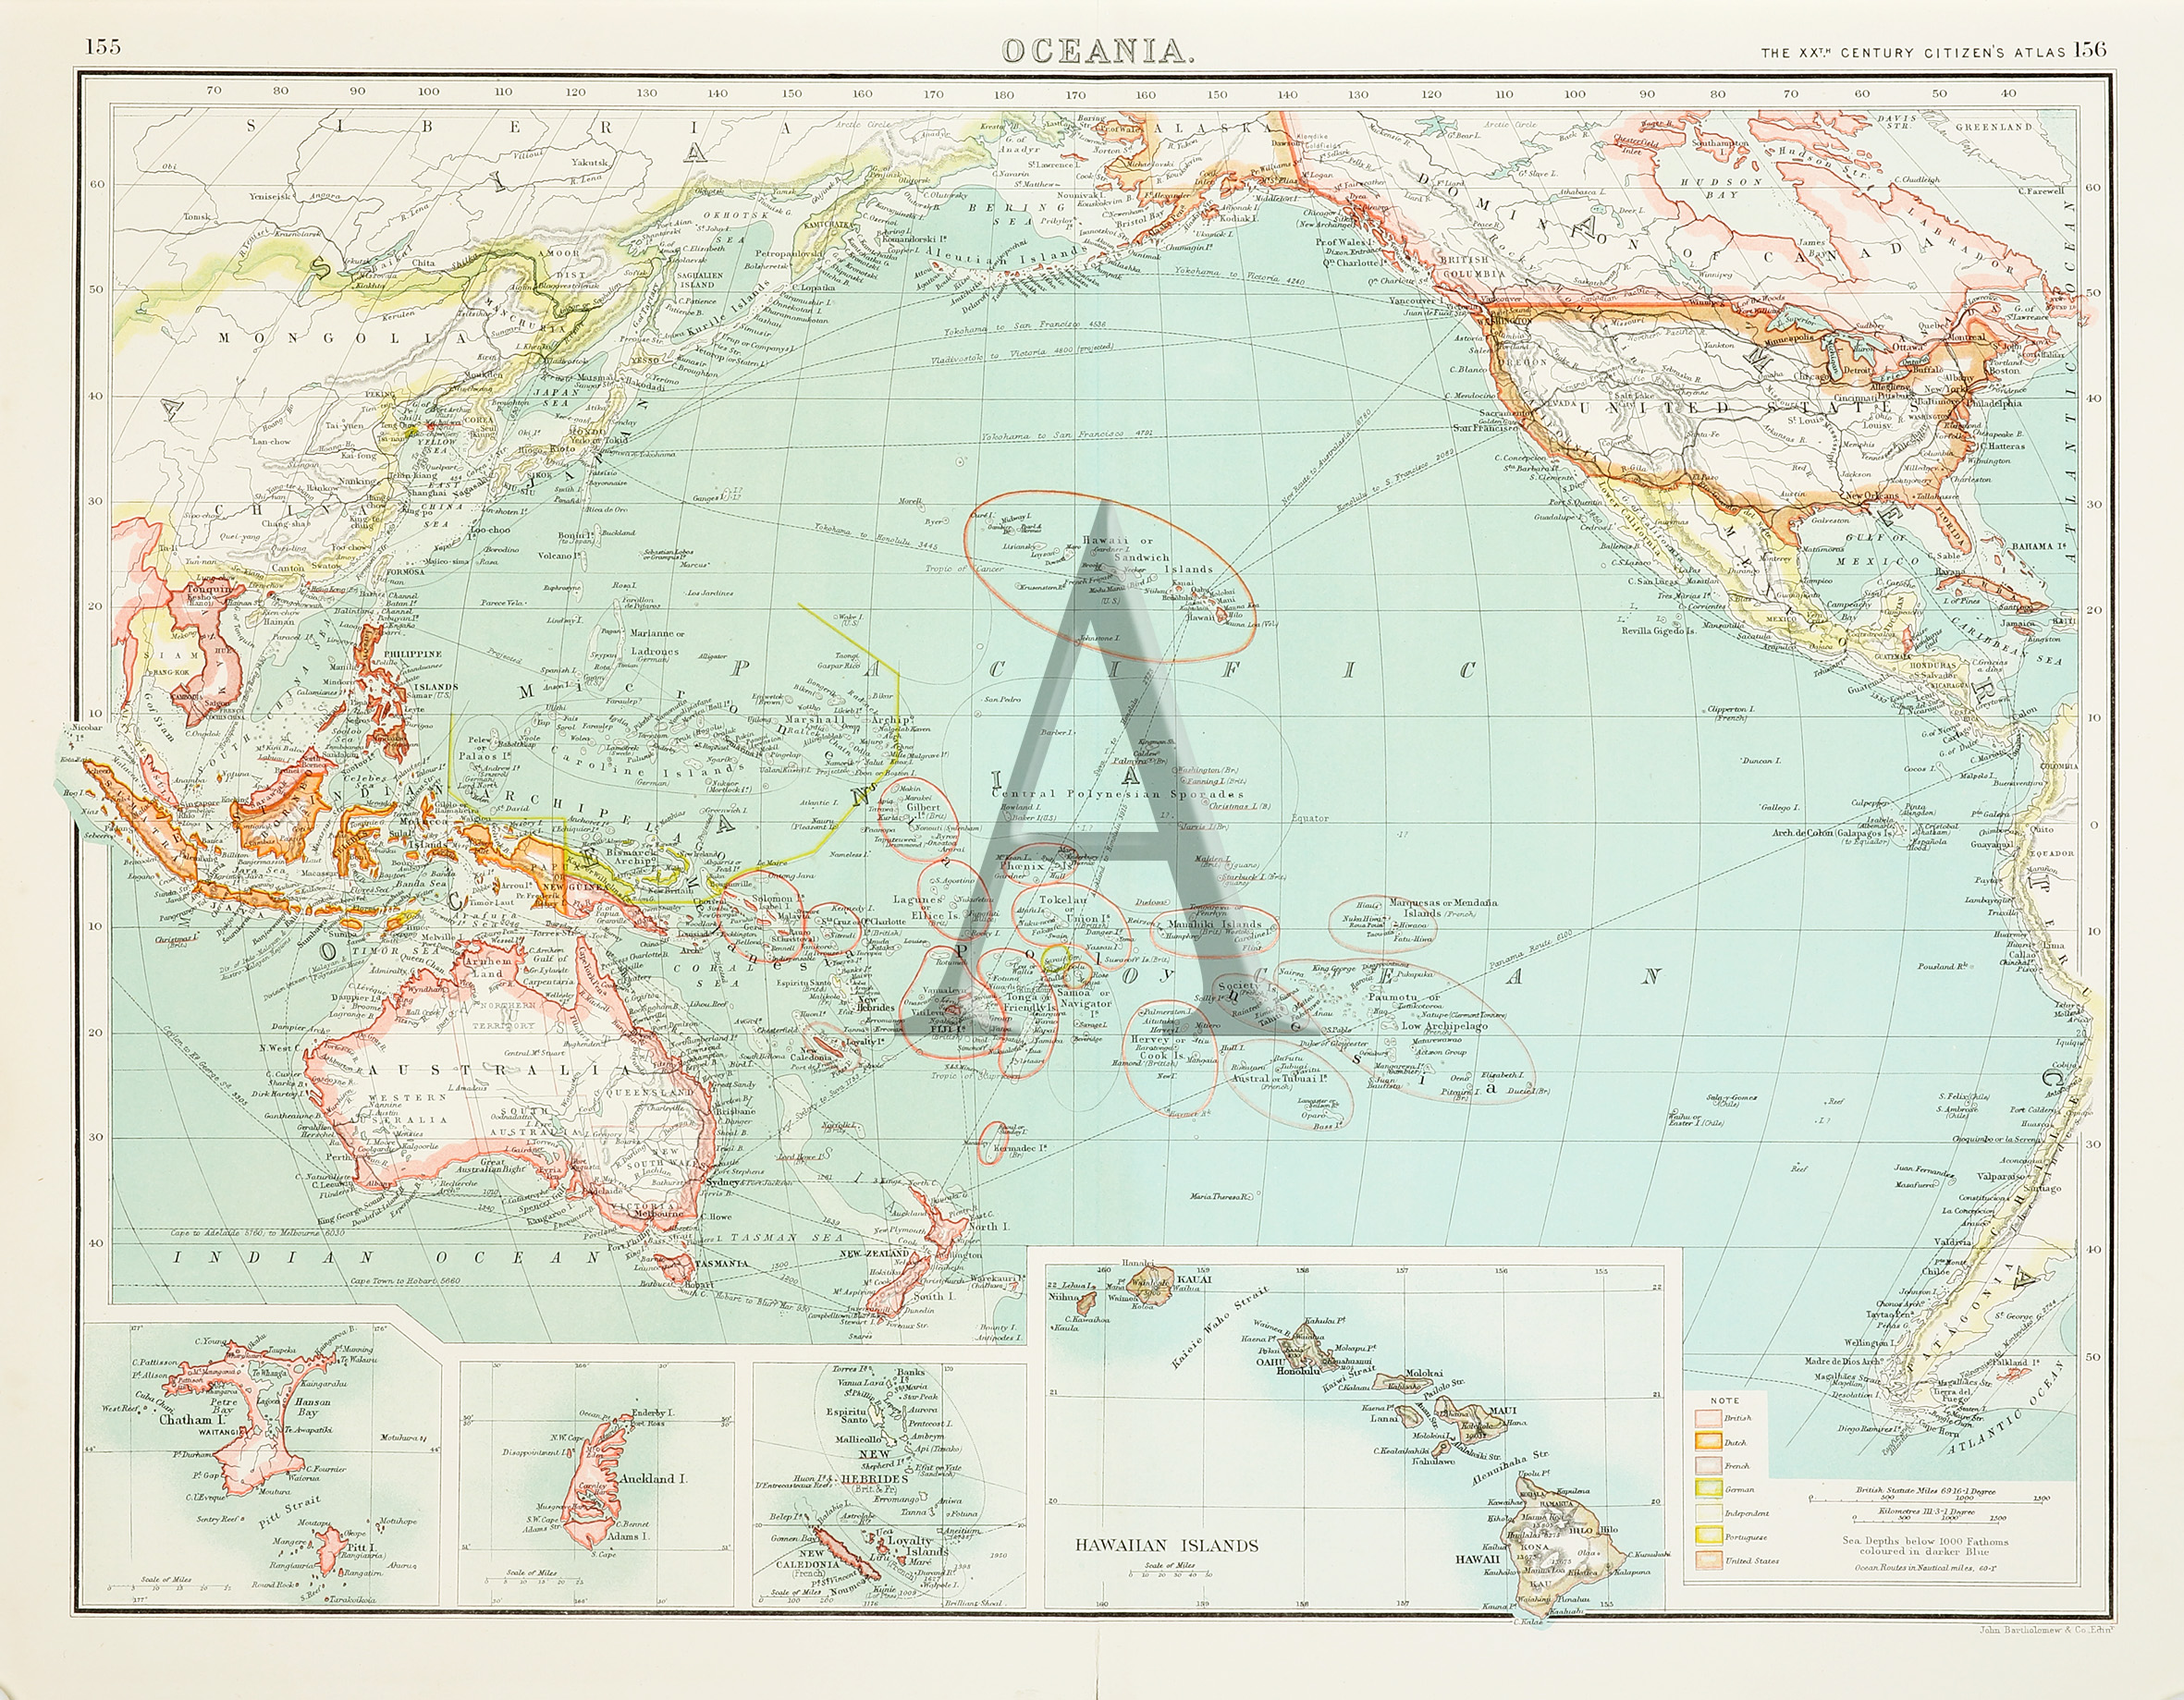 Oceania. - Antique Print from 1902